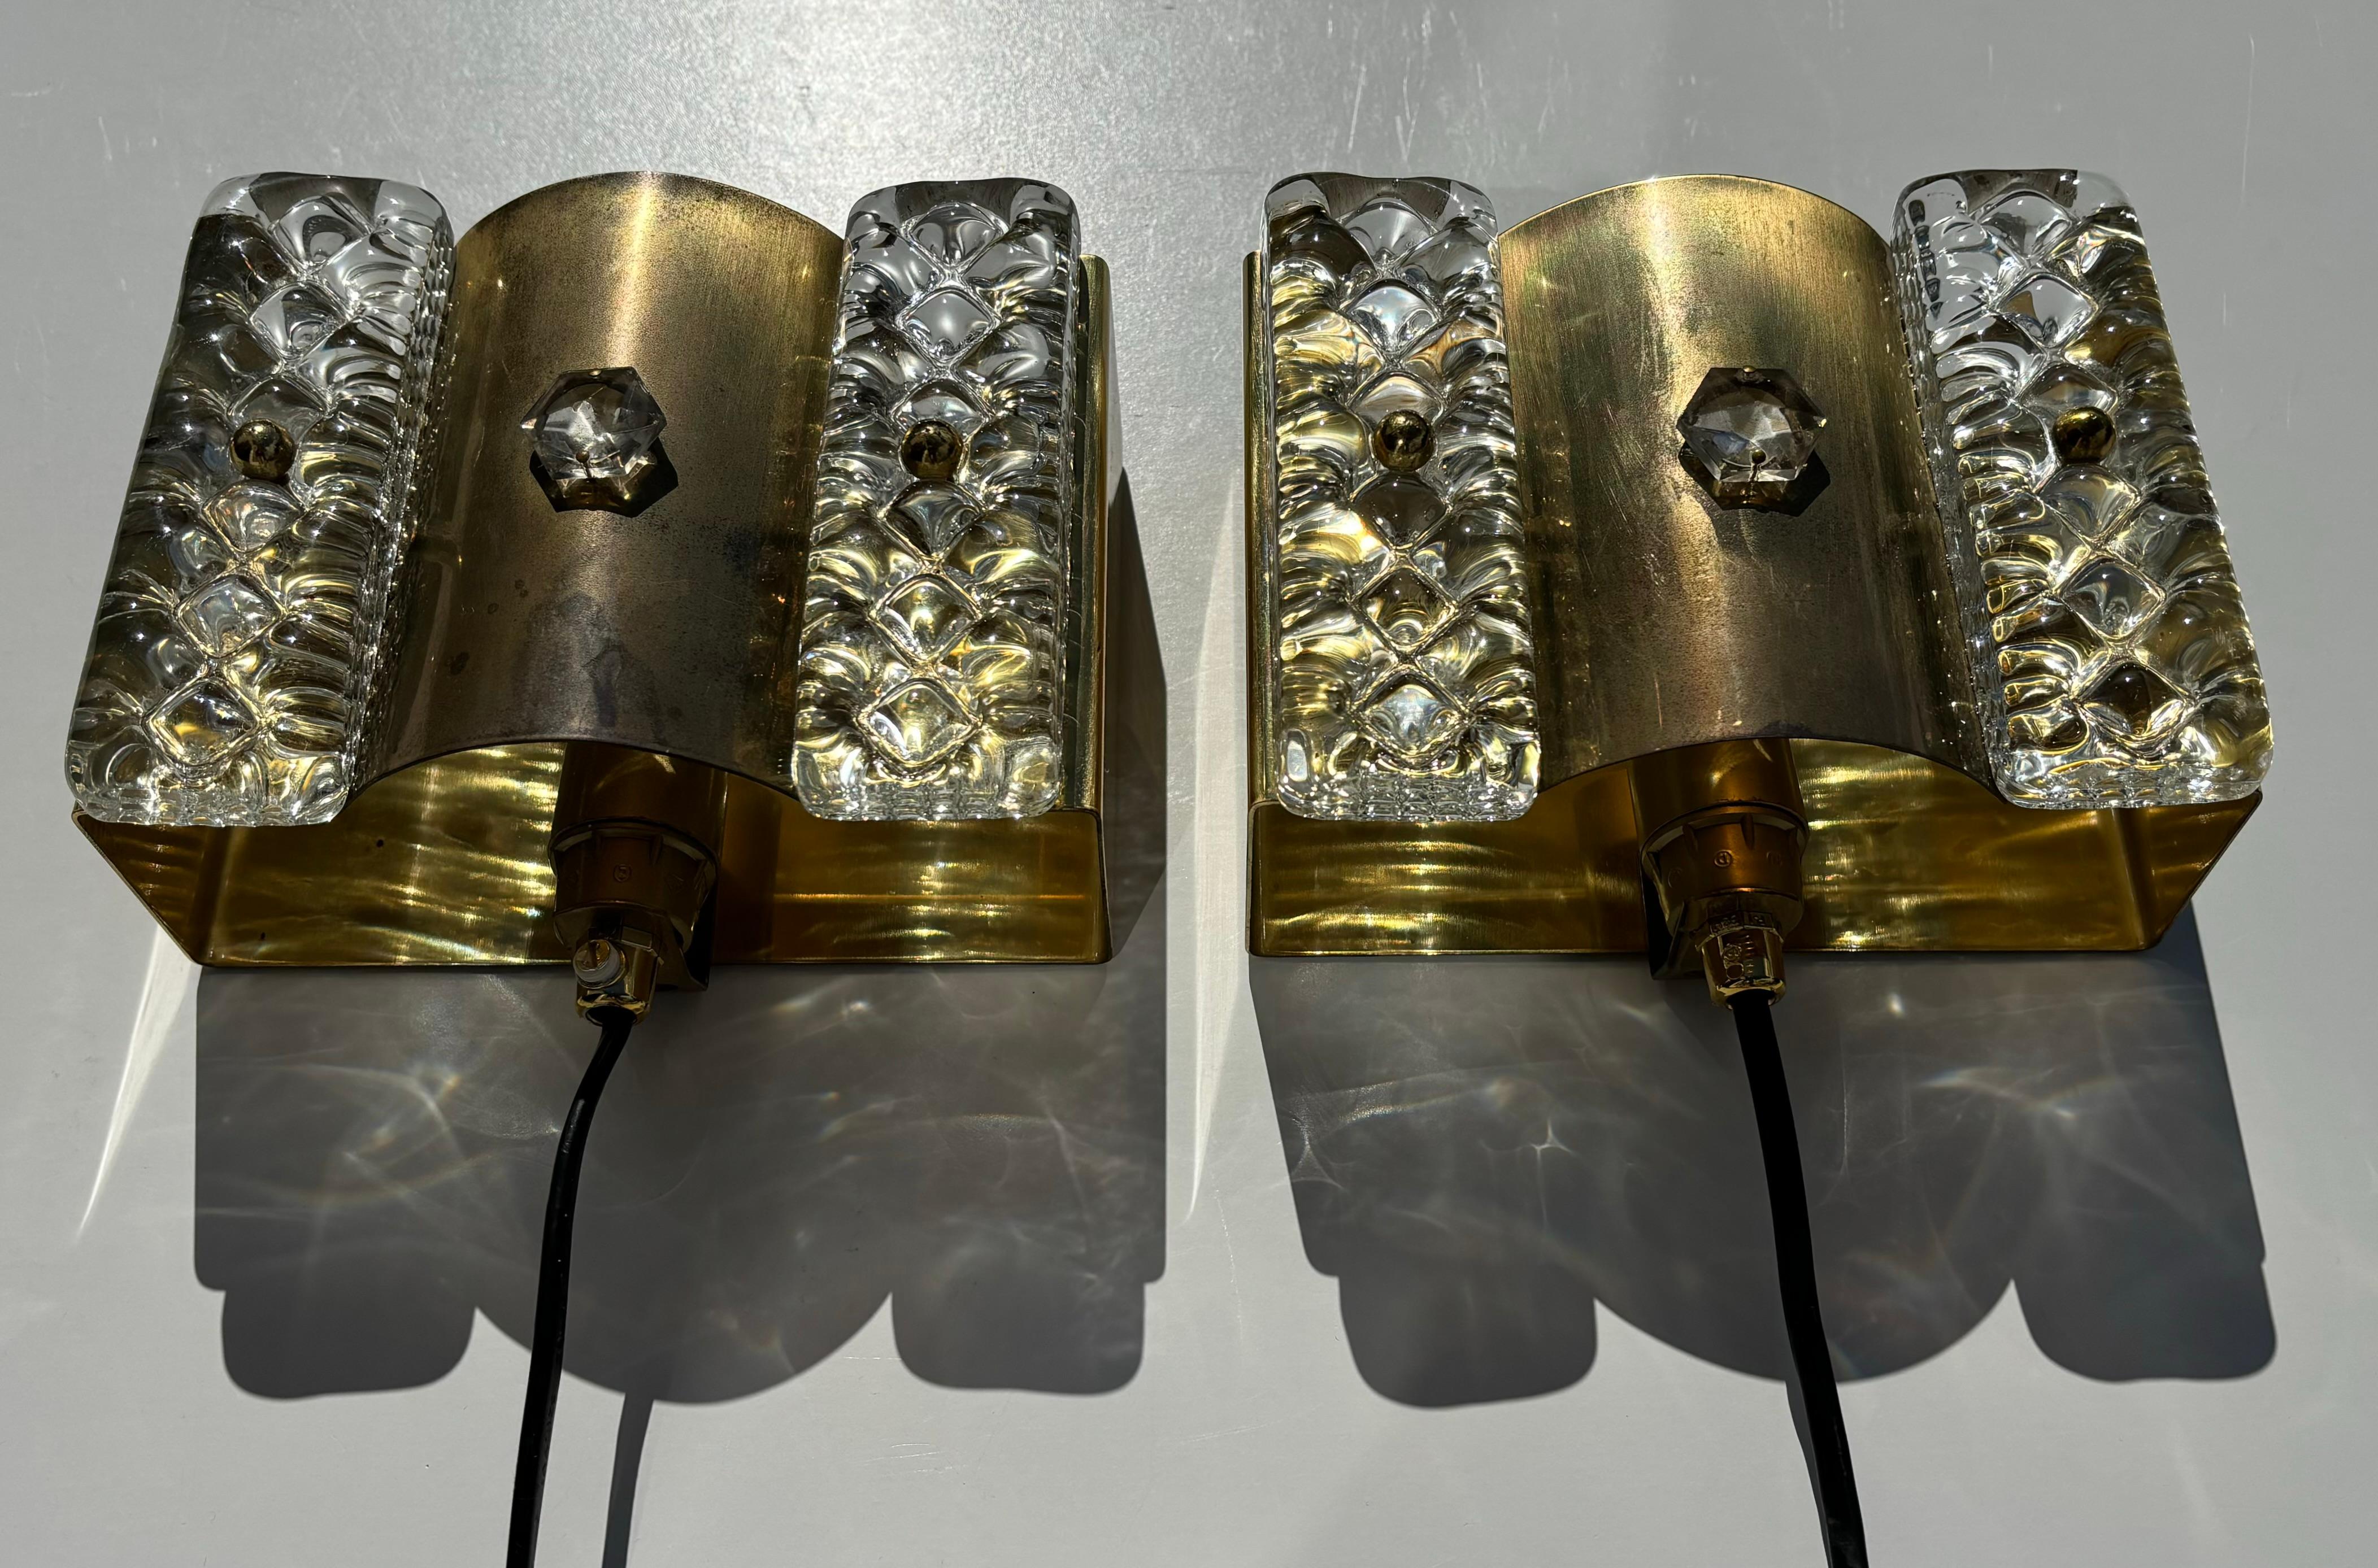 Pair of Danish midcentury modern brass, art glass wall sconces made by Vitrika in the 1960s. Square shaped brass mount with two clear textured solid glass pieces on each side. One light labelled on the back. Wired for Europe and the US with fitting